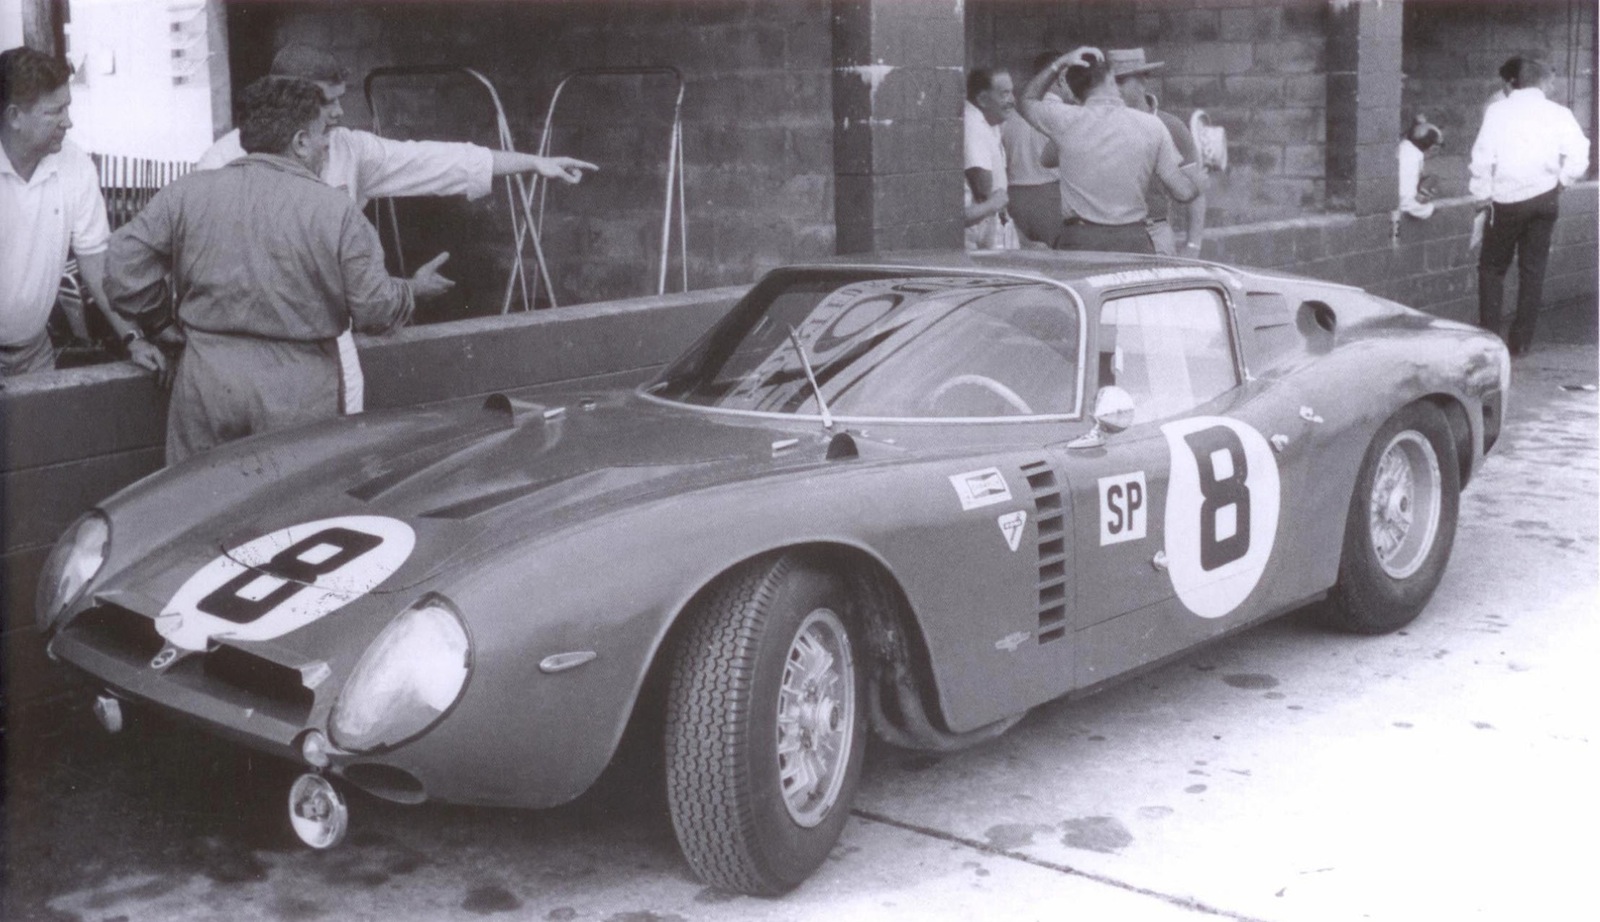 Two Crashed Iso Grifo/Bizzarrini Race Cars Are Still Missing 